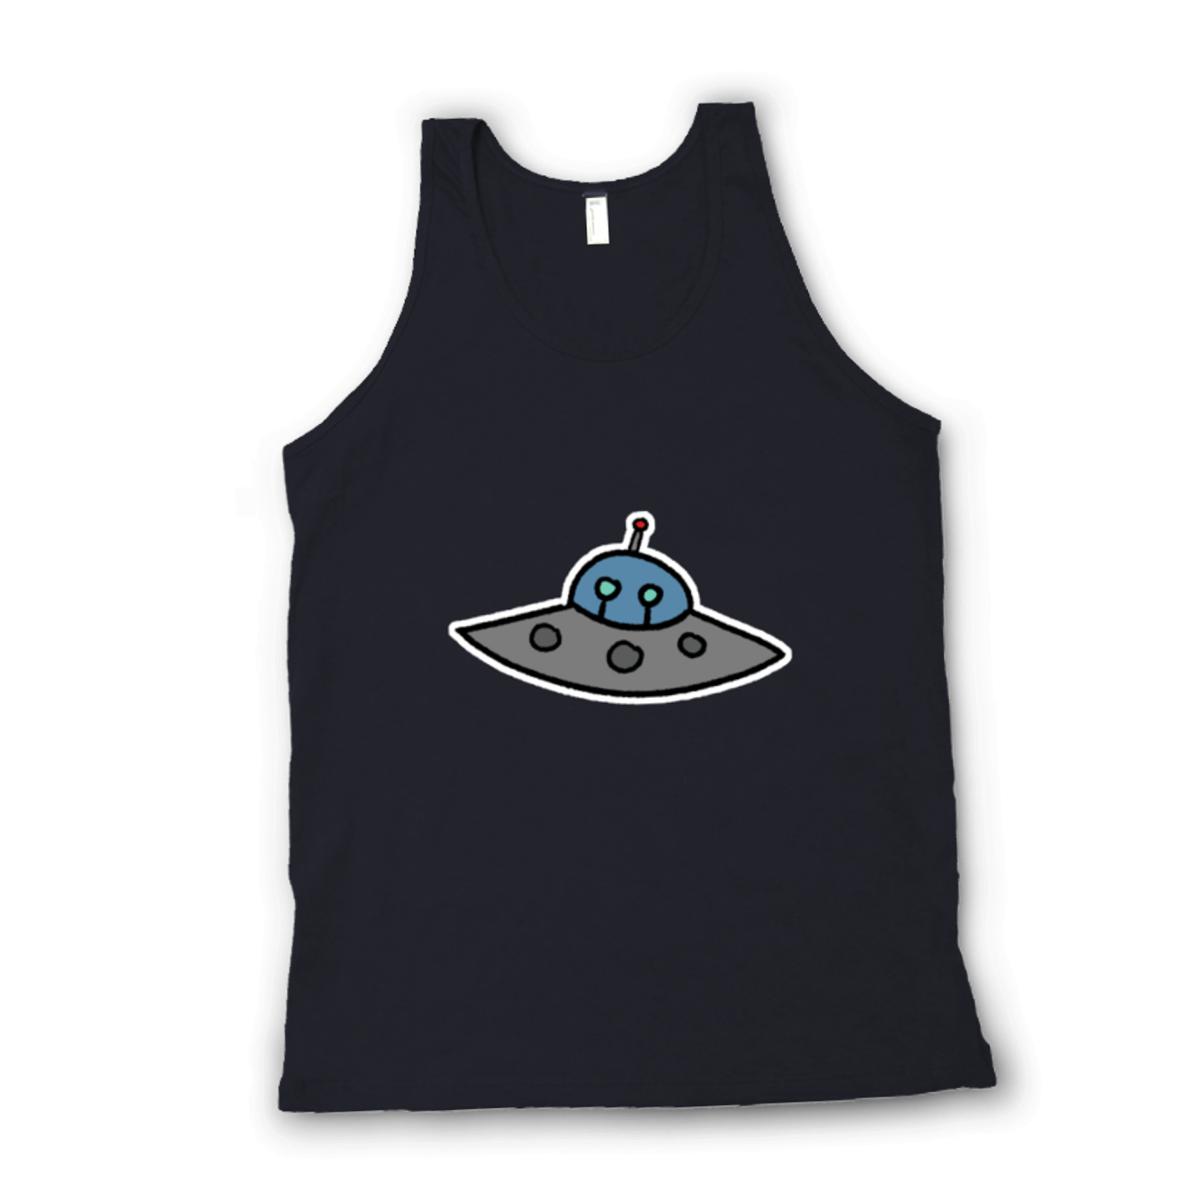 Flying Saucer Unisex Tank Top Small black